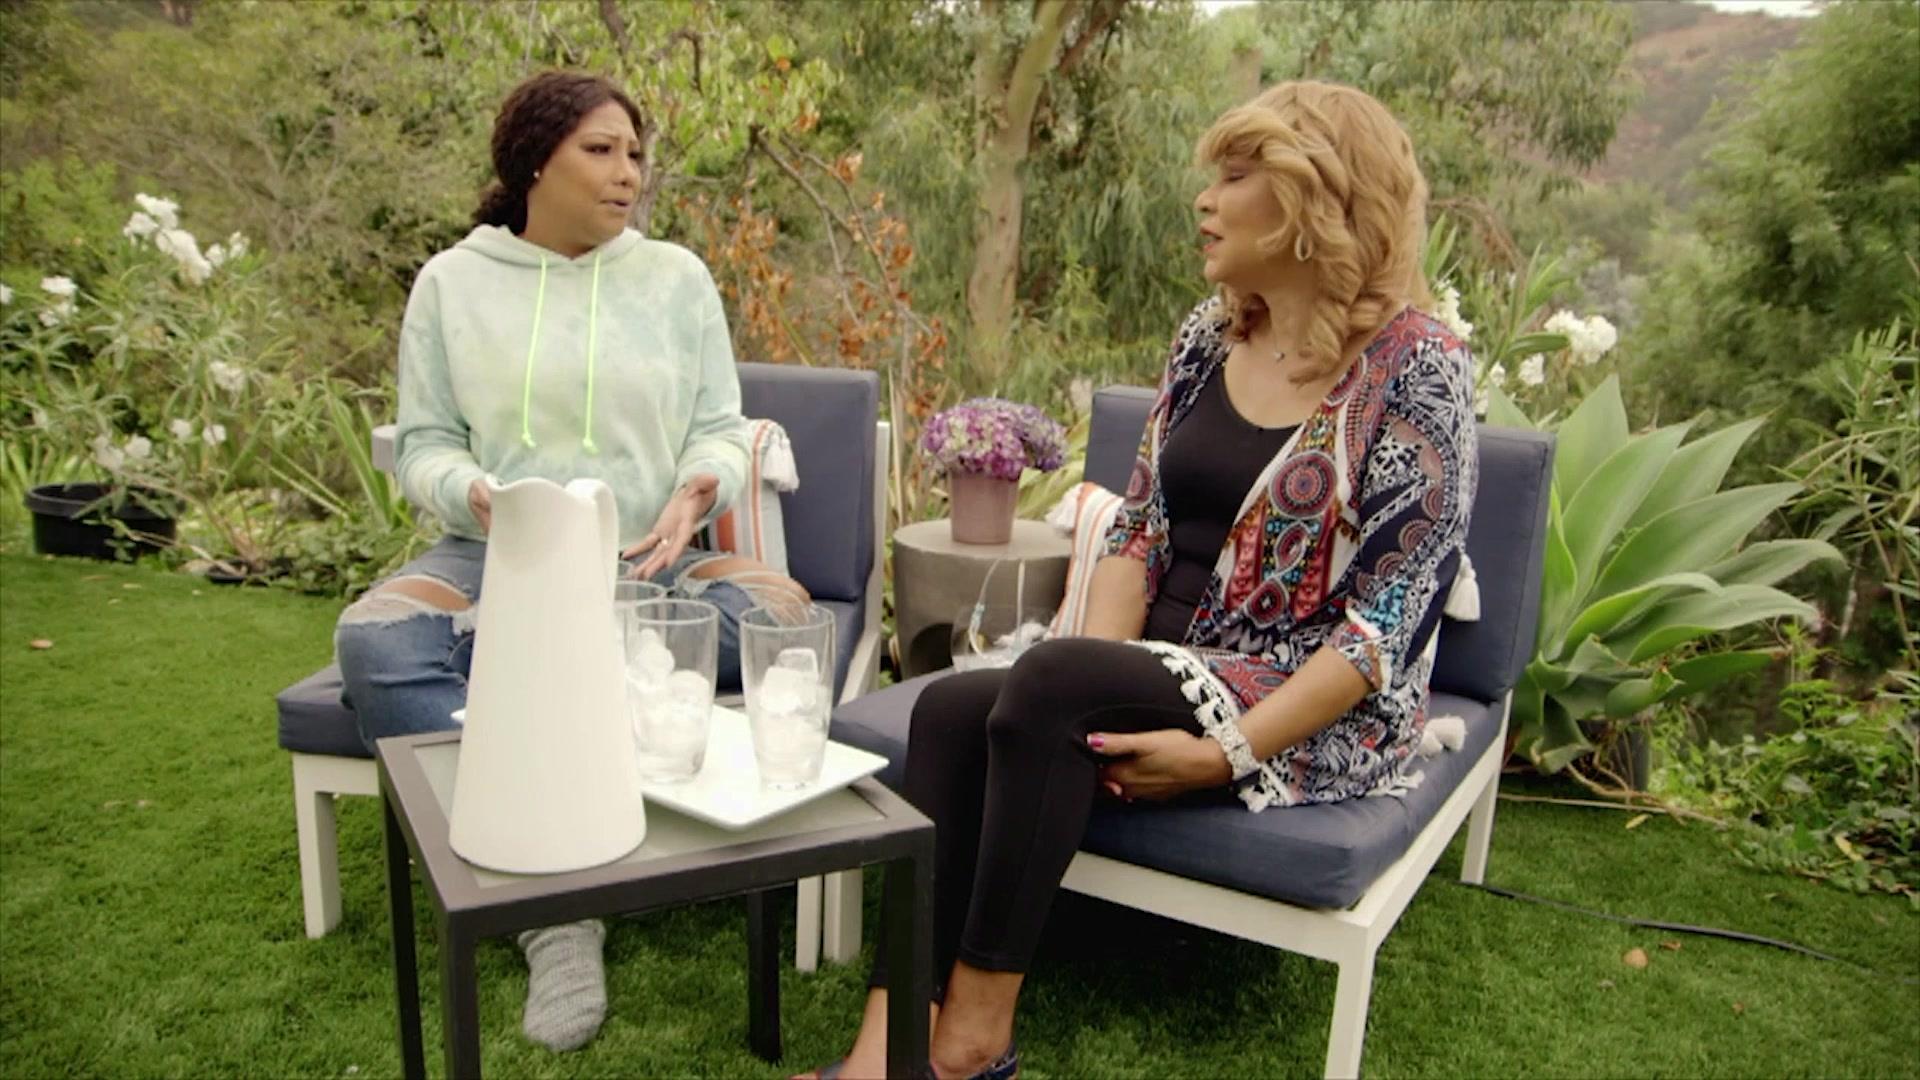 Watch Traci and Mommy Have a Heart-to-Heart | Braxton Family Values Video Extras